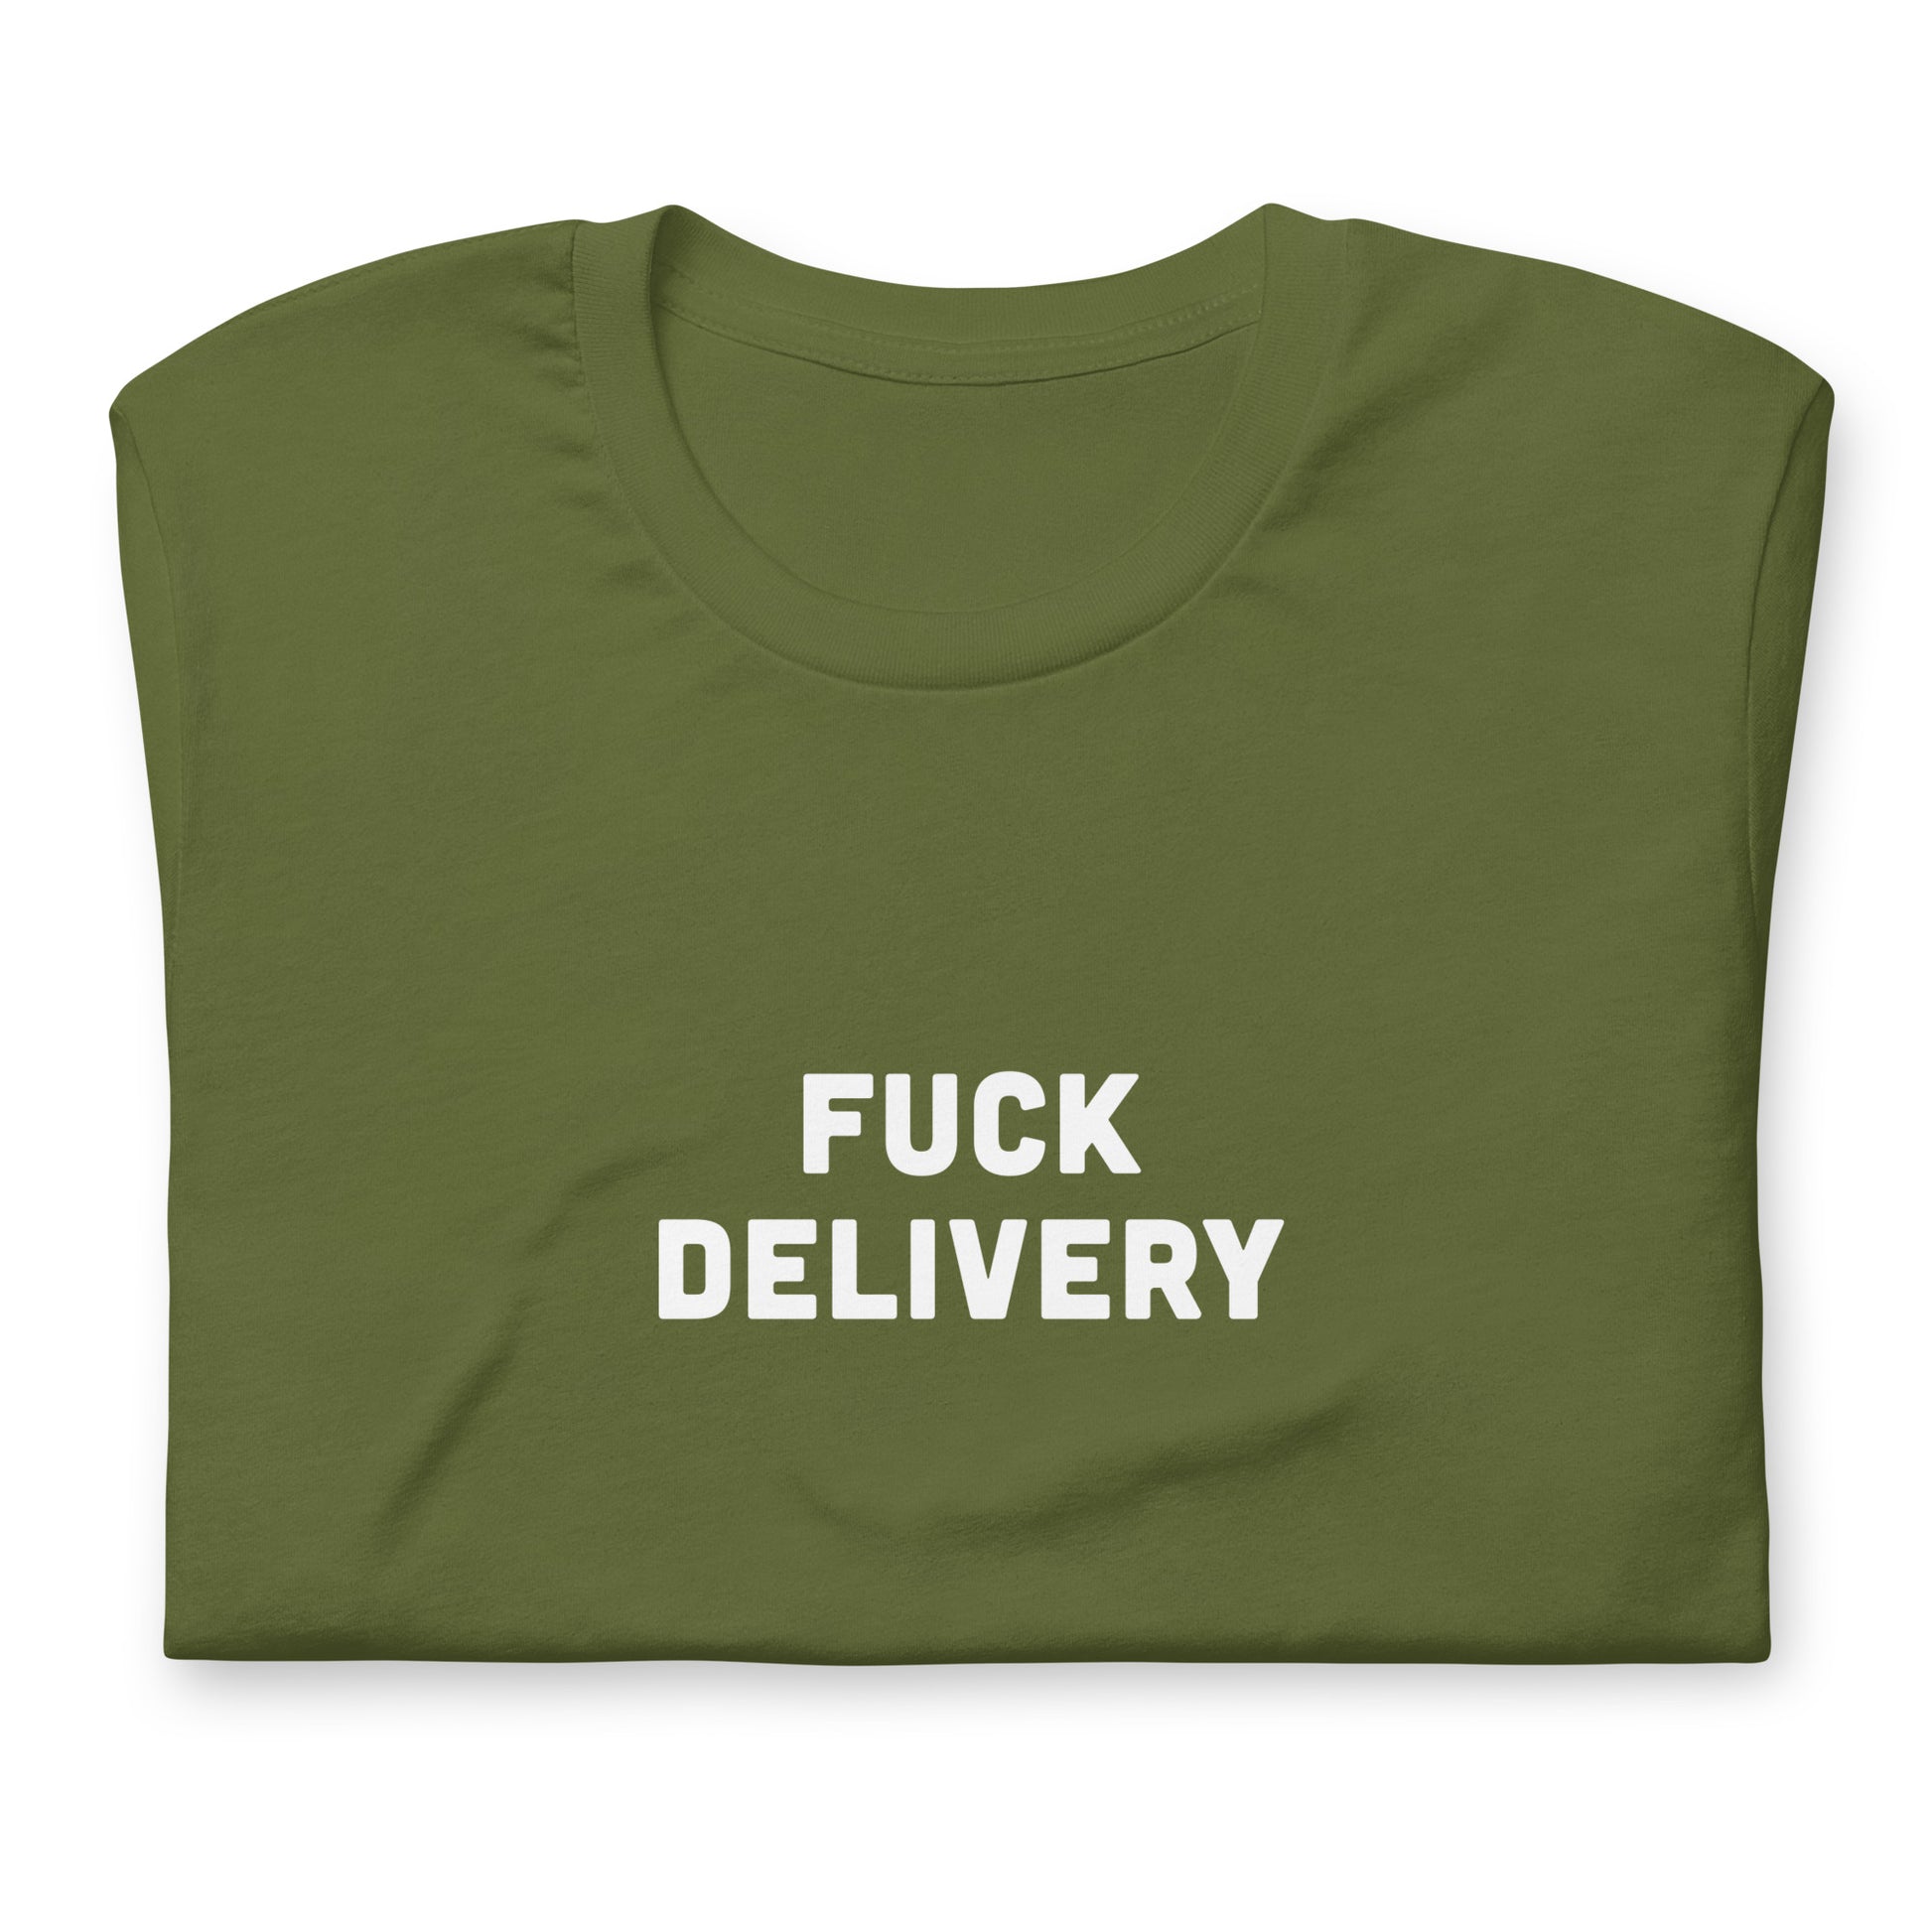 Fuck Delivery T-Shirt Size L Color Navy